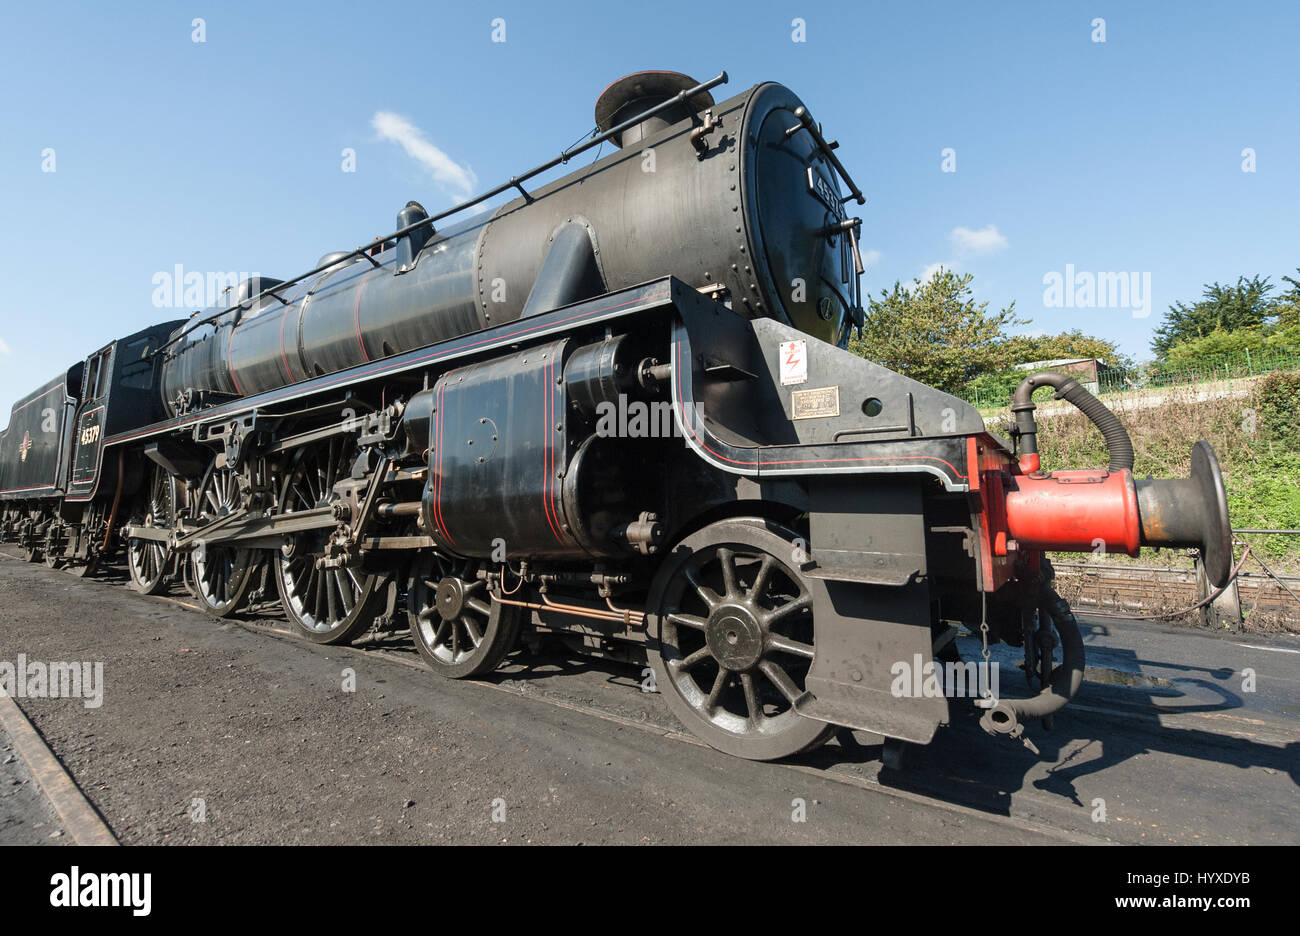 Ropley, UK - 19 September, 2015: Vintage steam locomotive LMS Black 5 - 45379 at the Mid-Hants Watercress railway station of Ropley, UK Stock Photo